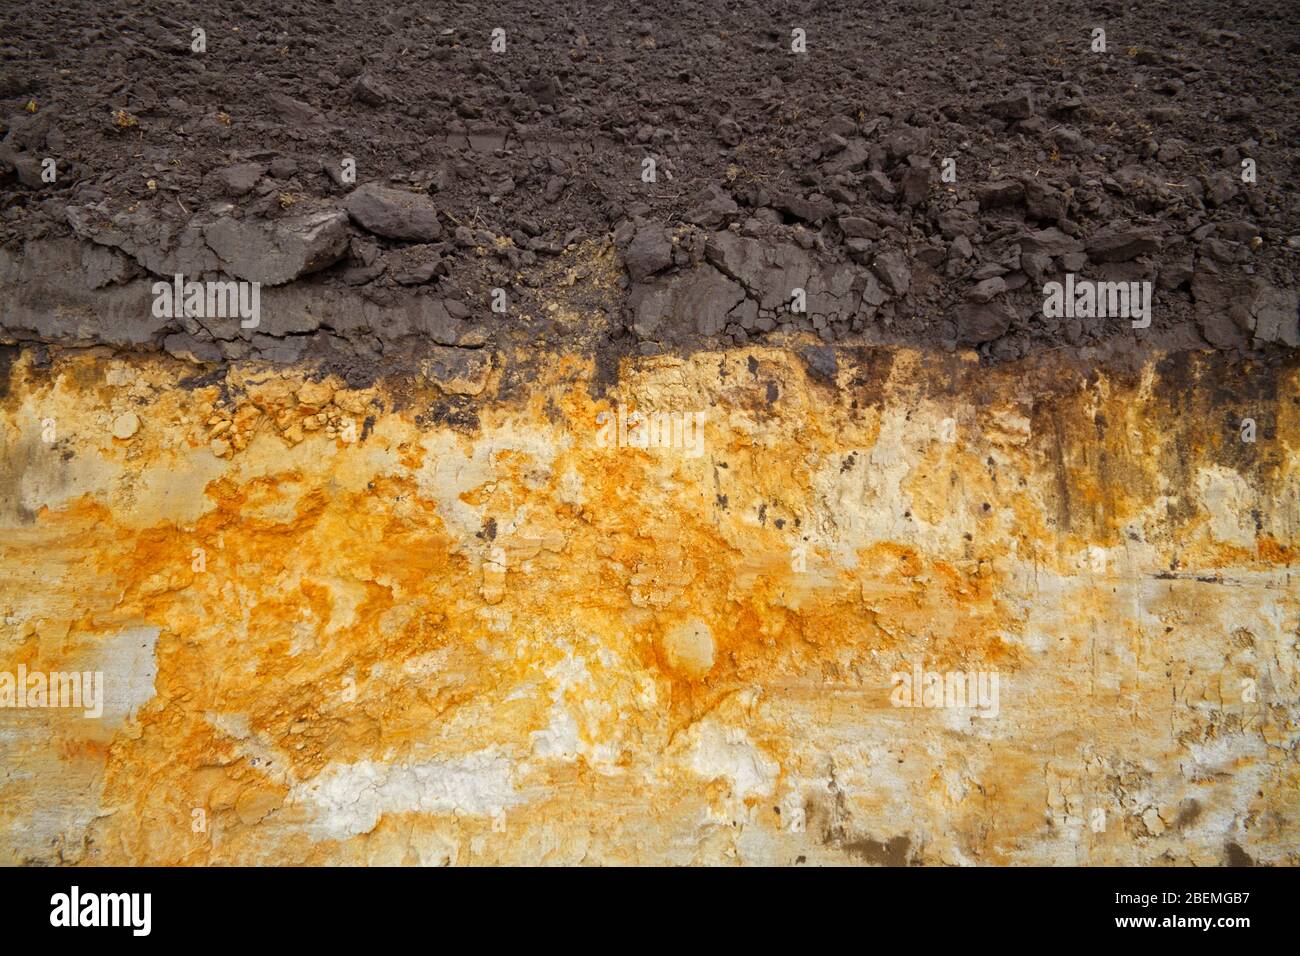 The side of a freshly dug field drainage ditch showing soil stratification humic topsoil and iron precipitation in subsoil Stock Photo